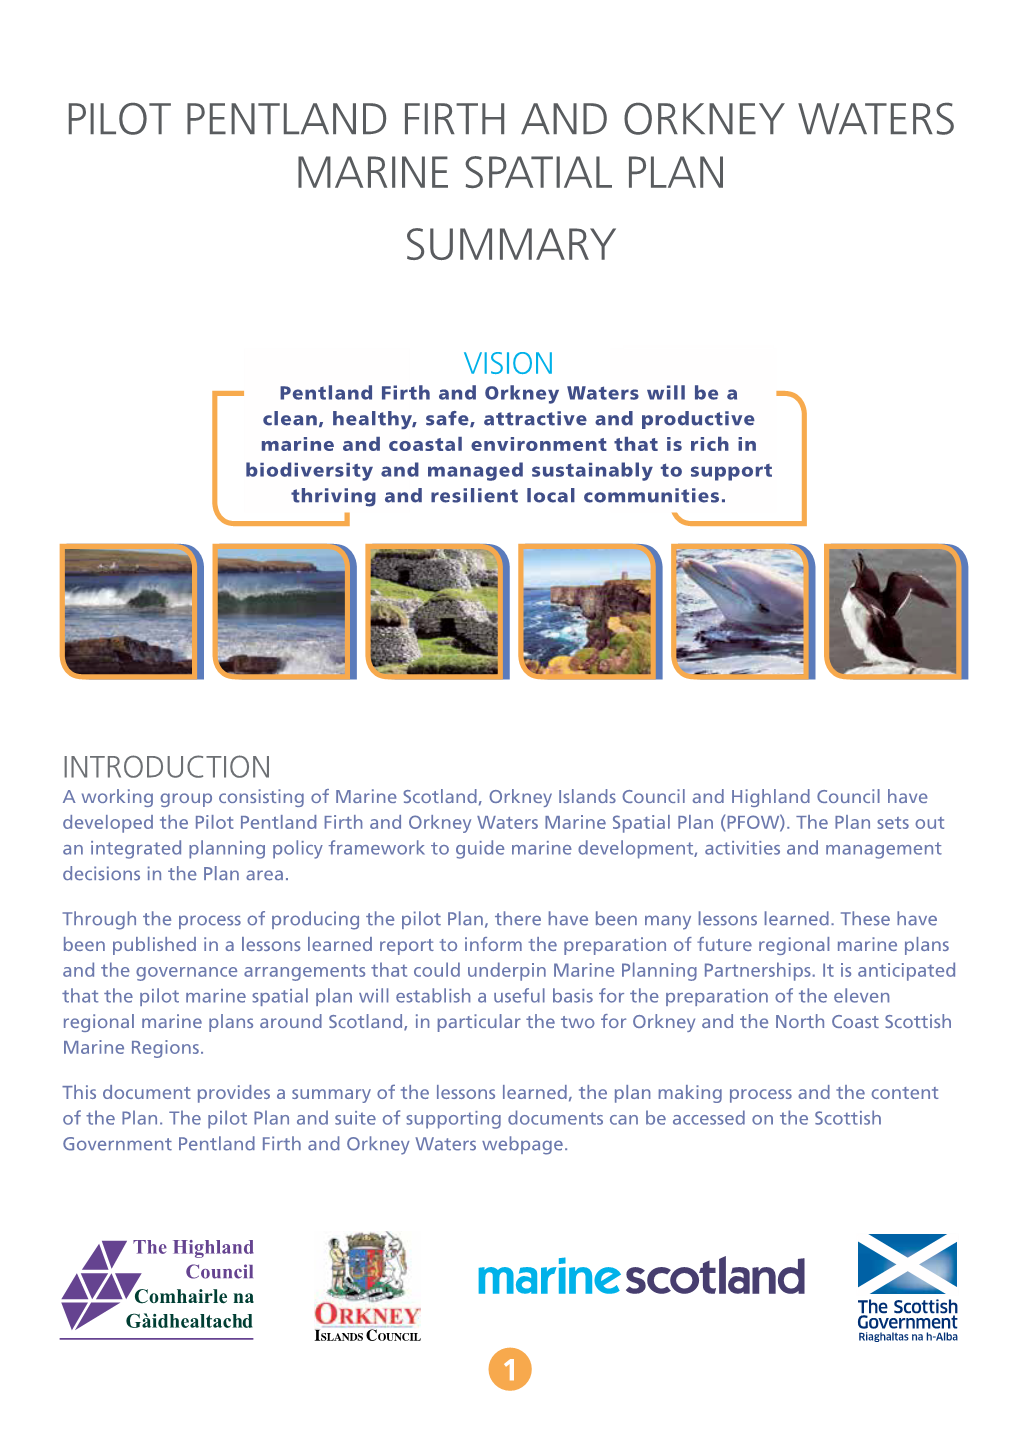 Pilot Pentland Firth and Orkney Waters Marine Spatial Plan Summary